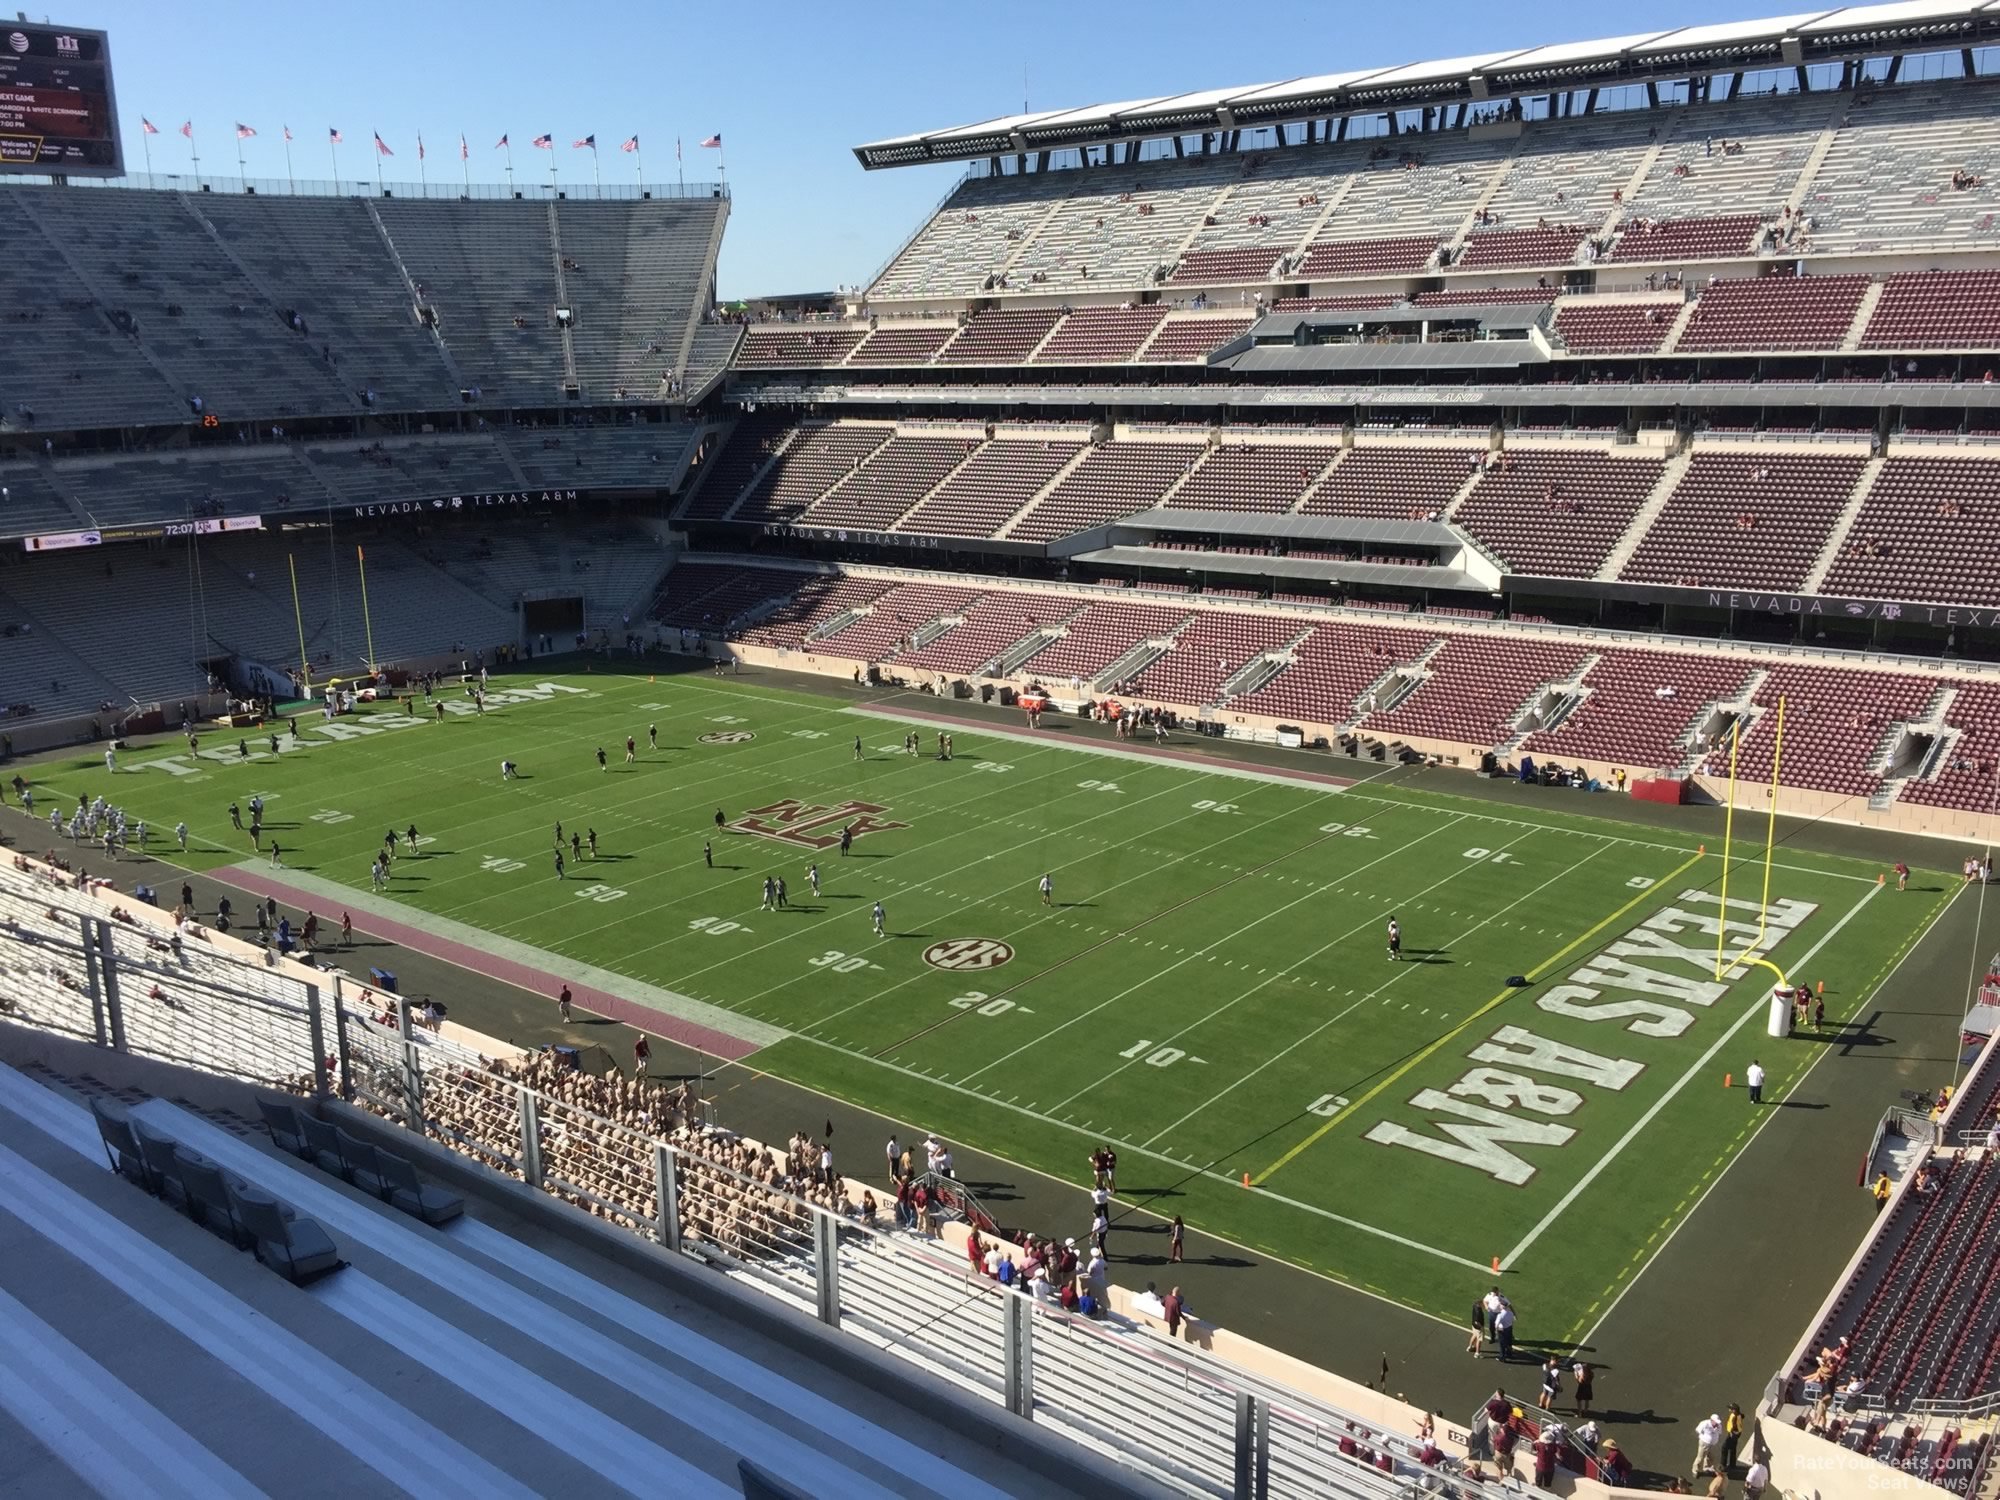 Kyle Field Seating Chart View